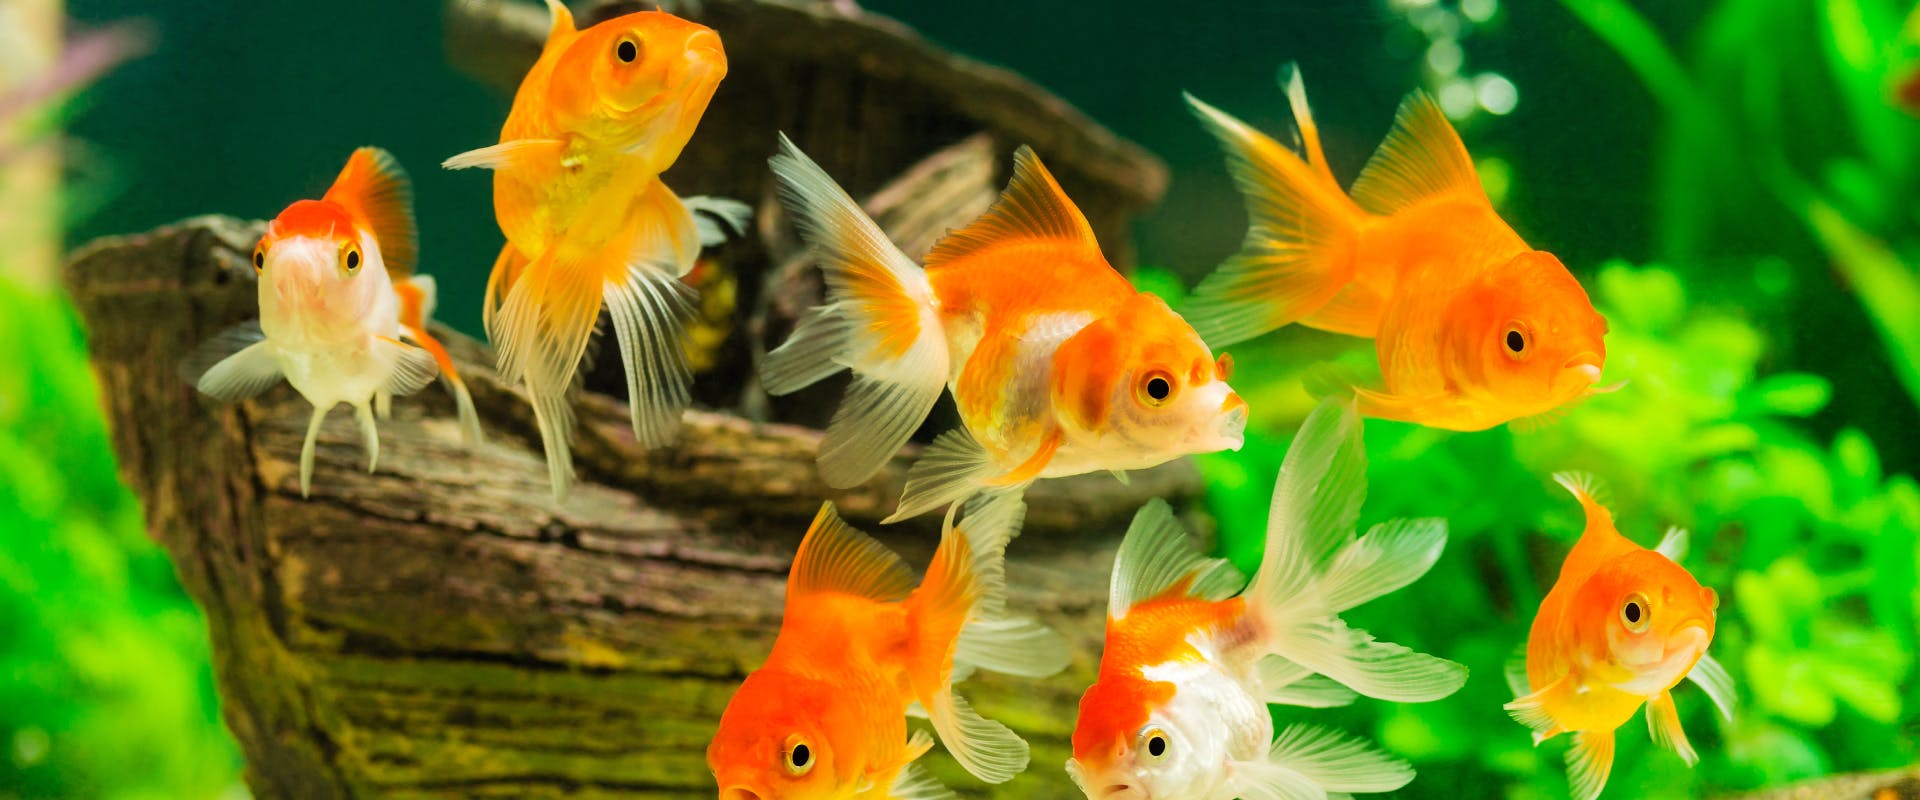 a group of white and orange goldfish guppies in a fish tank